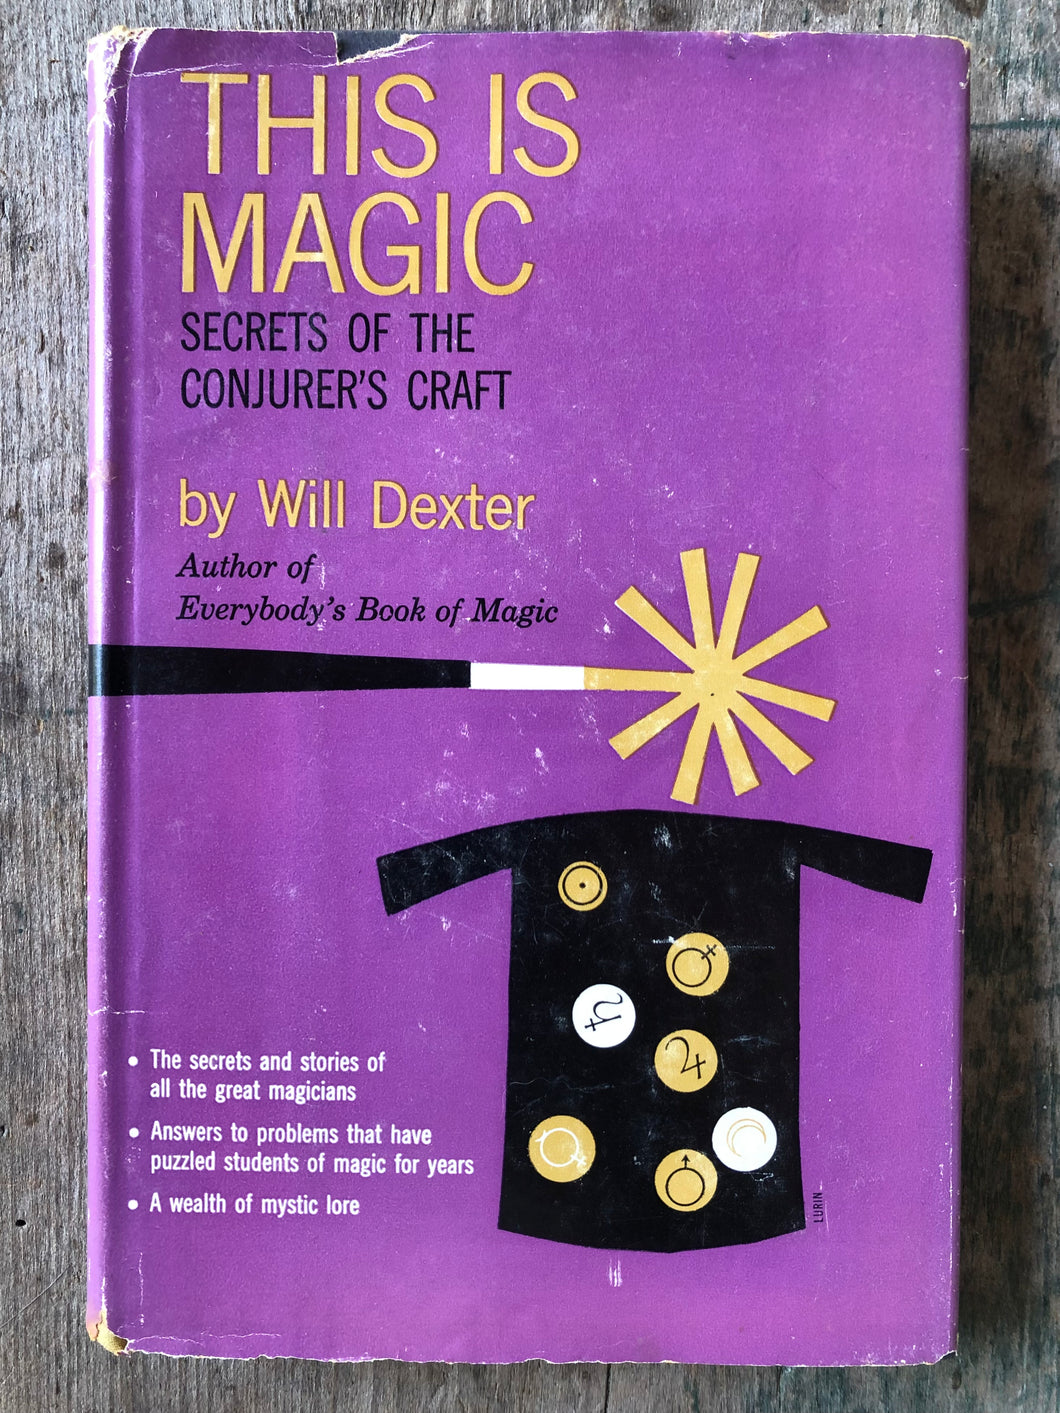 This is Magic: Secrets of the Conjurer’s Craft. by Will Dexter